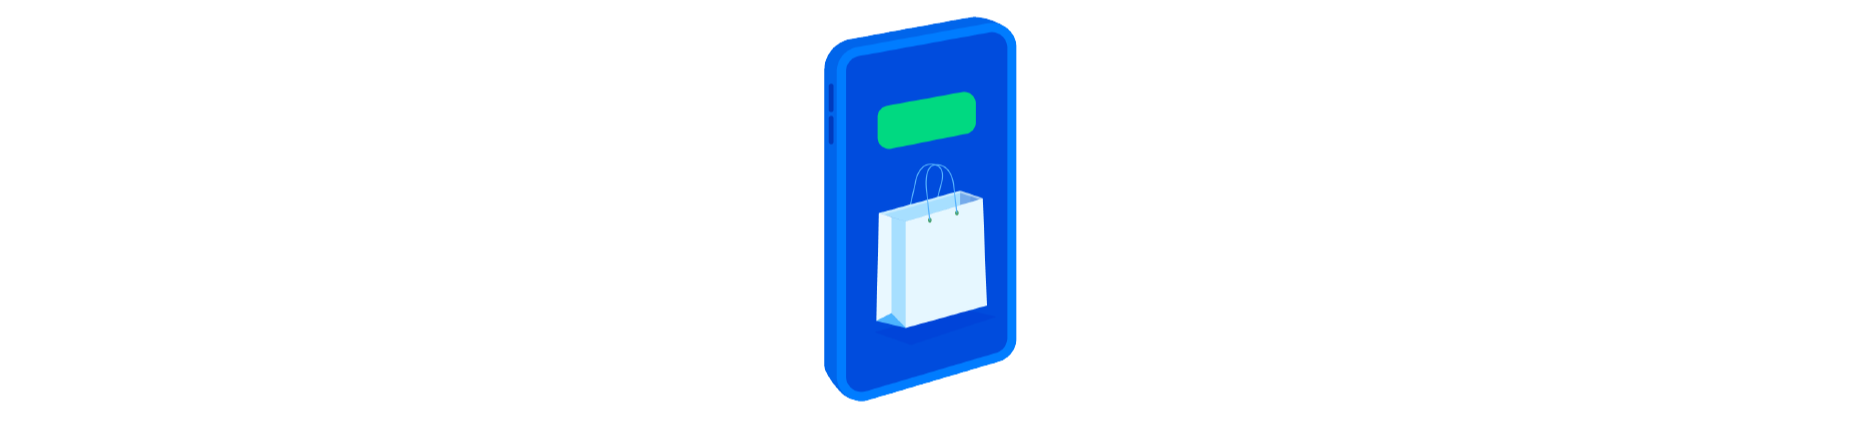 An illustrated icon depicting a phone with a shopping bag on the screen